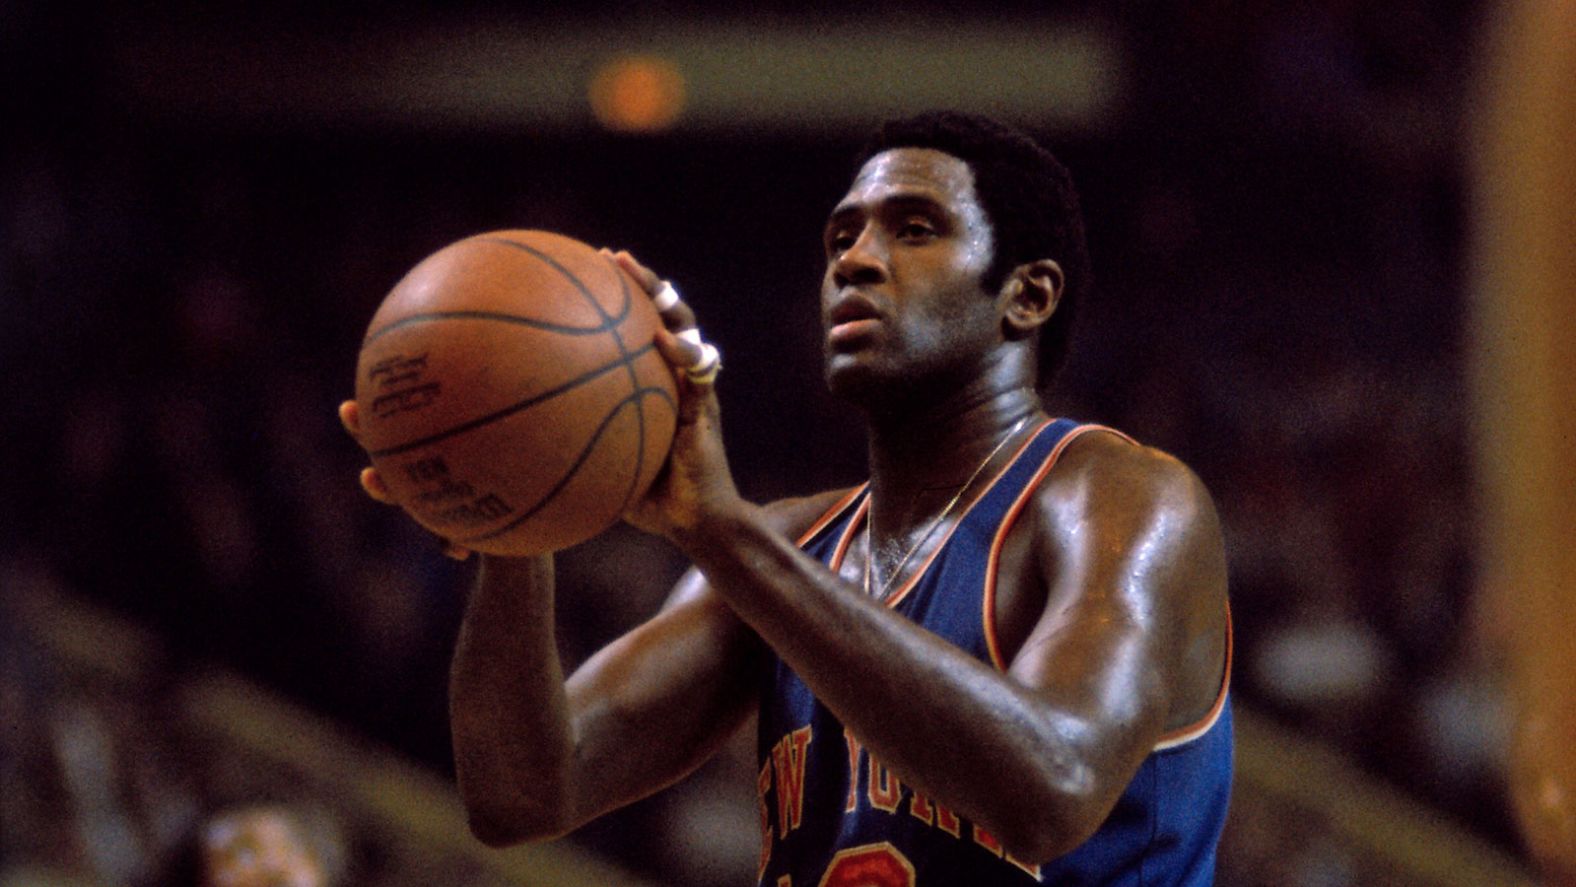 <a href="https://www.cnn.com/2023/03/21/us/willis-reed-new-york-knicks-obit/index.html" target="_blank">Willis Reed</a>, who helped the New York Knicks win two NBA titles in the 1970s, died at the age of 80, the National Basketball Retired Players Association said on March 21.